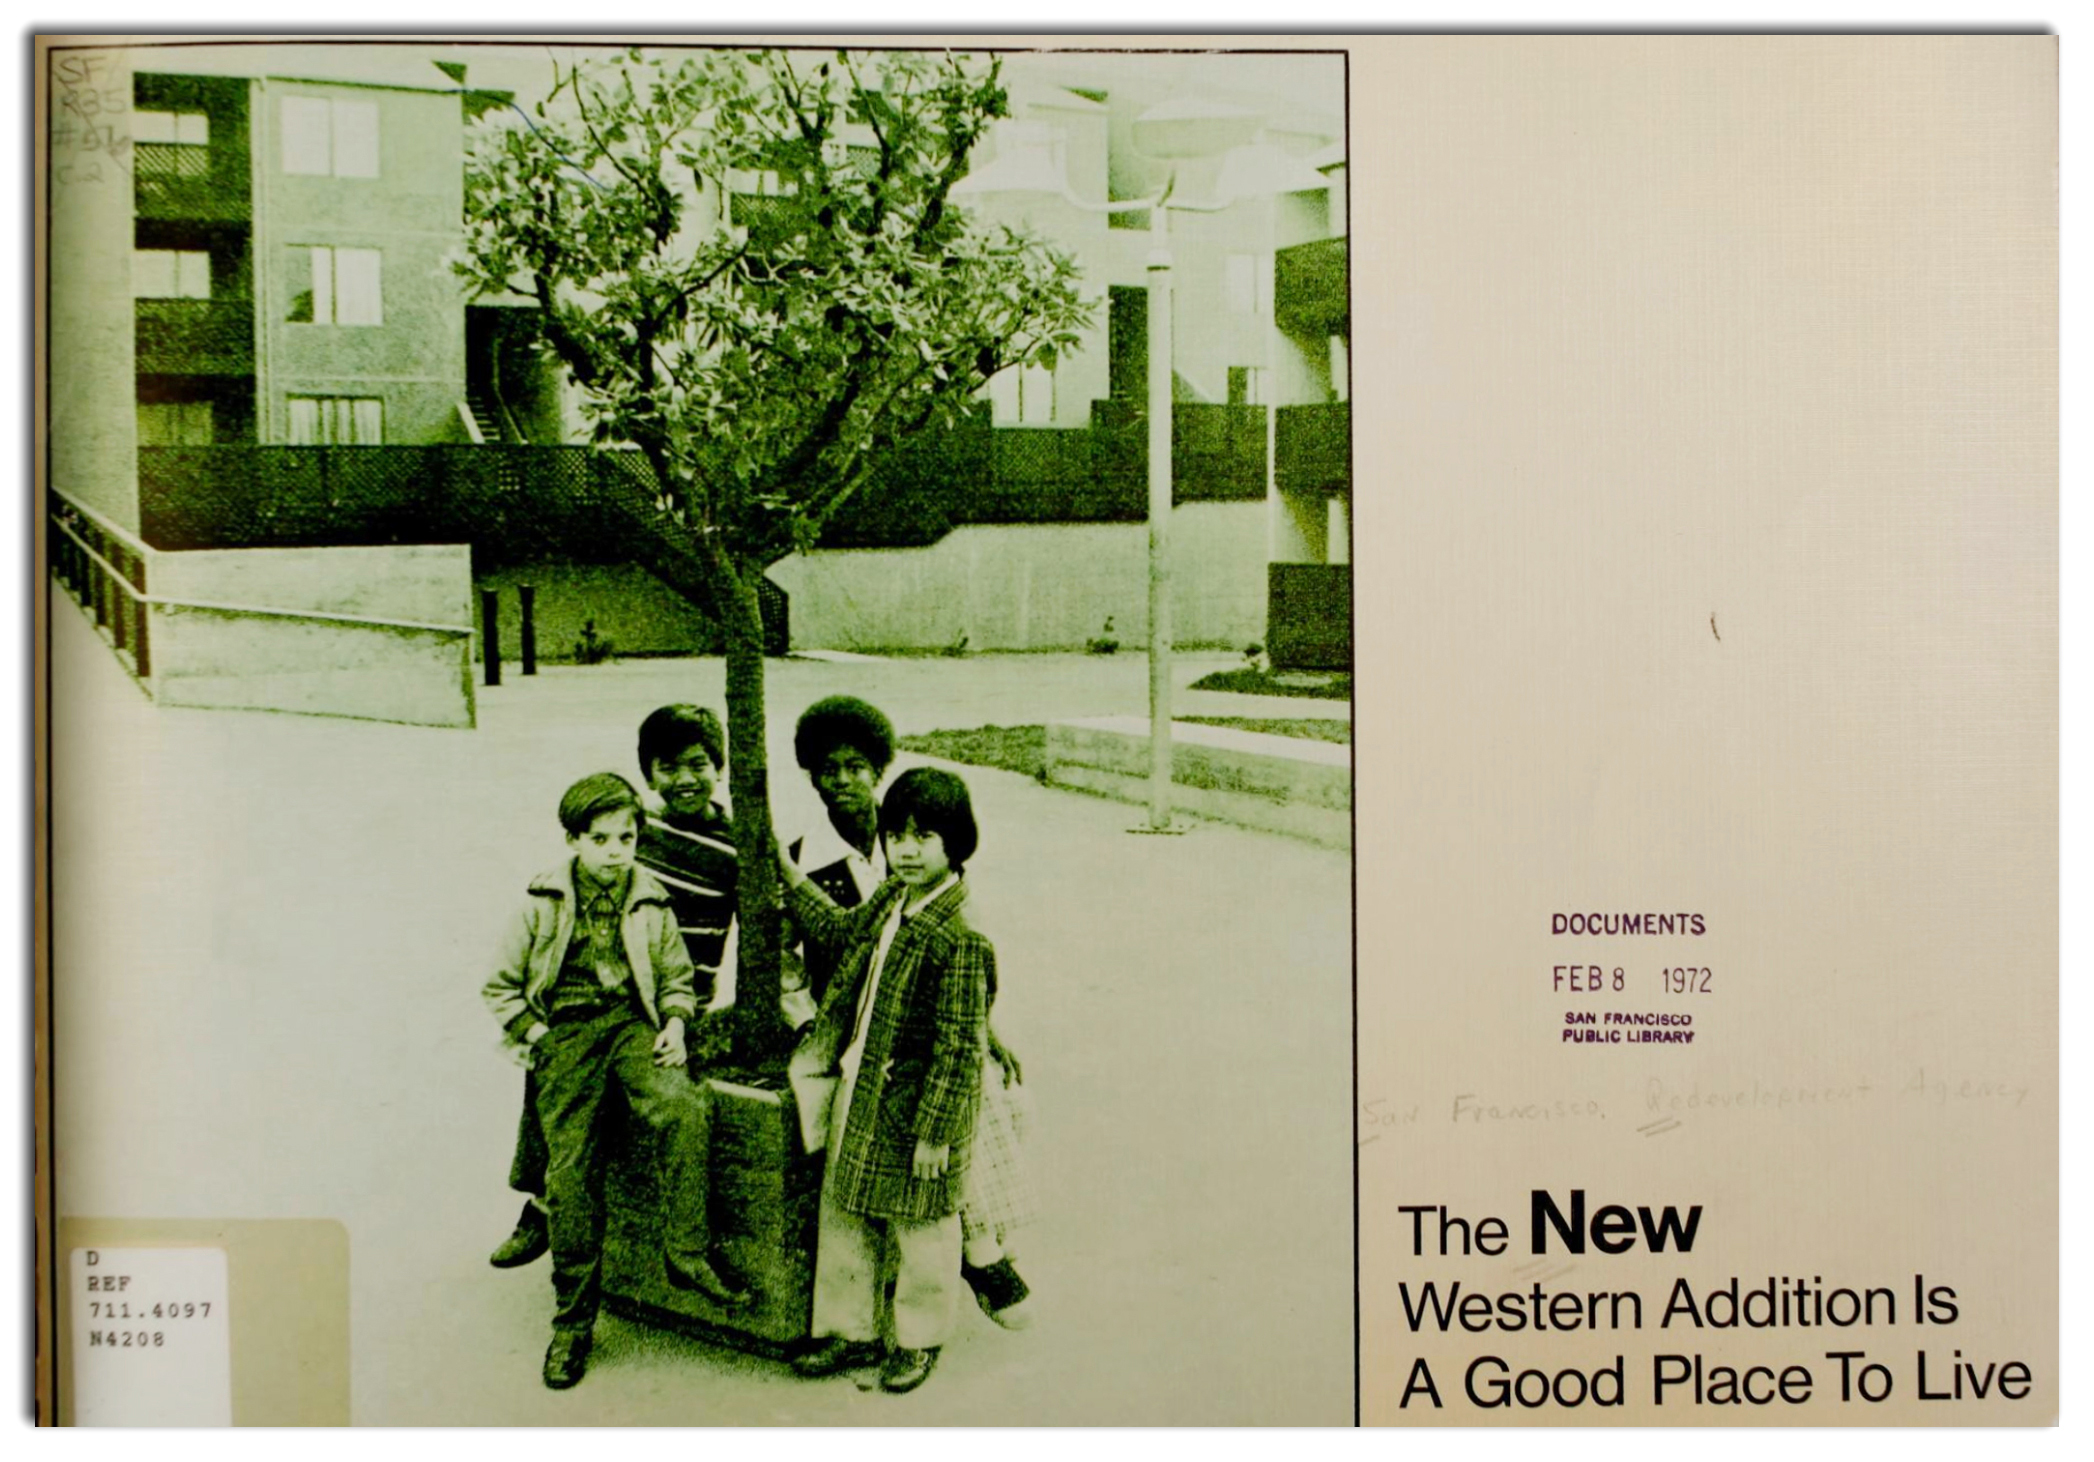 A booklet published in 1971 outlines new housing developments in the Western Addition. London Breed was raised in the neighborhood's Plaza East public housing project. | Courtesy San Francisco Redevelopment Agency